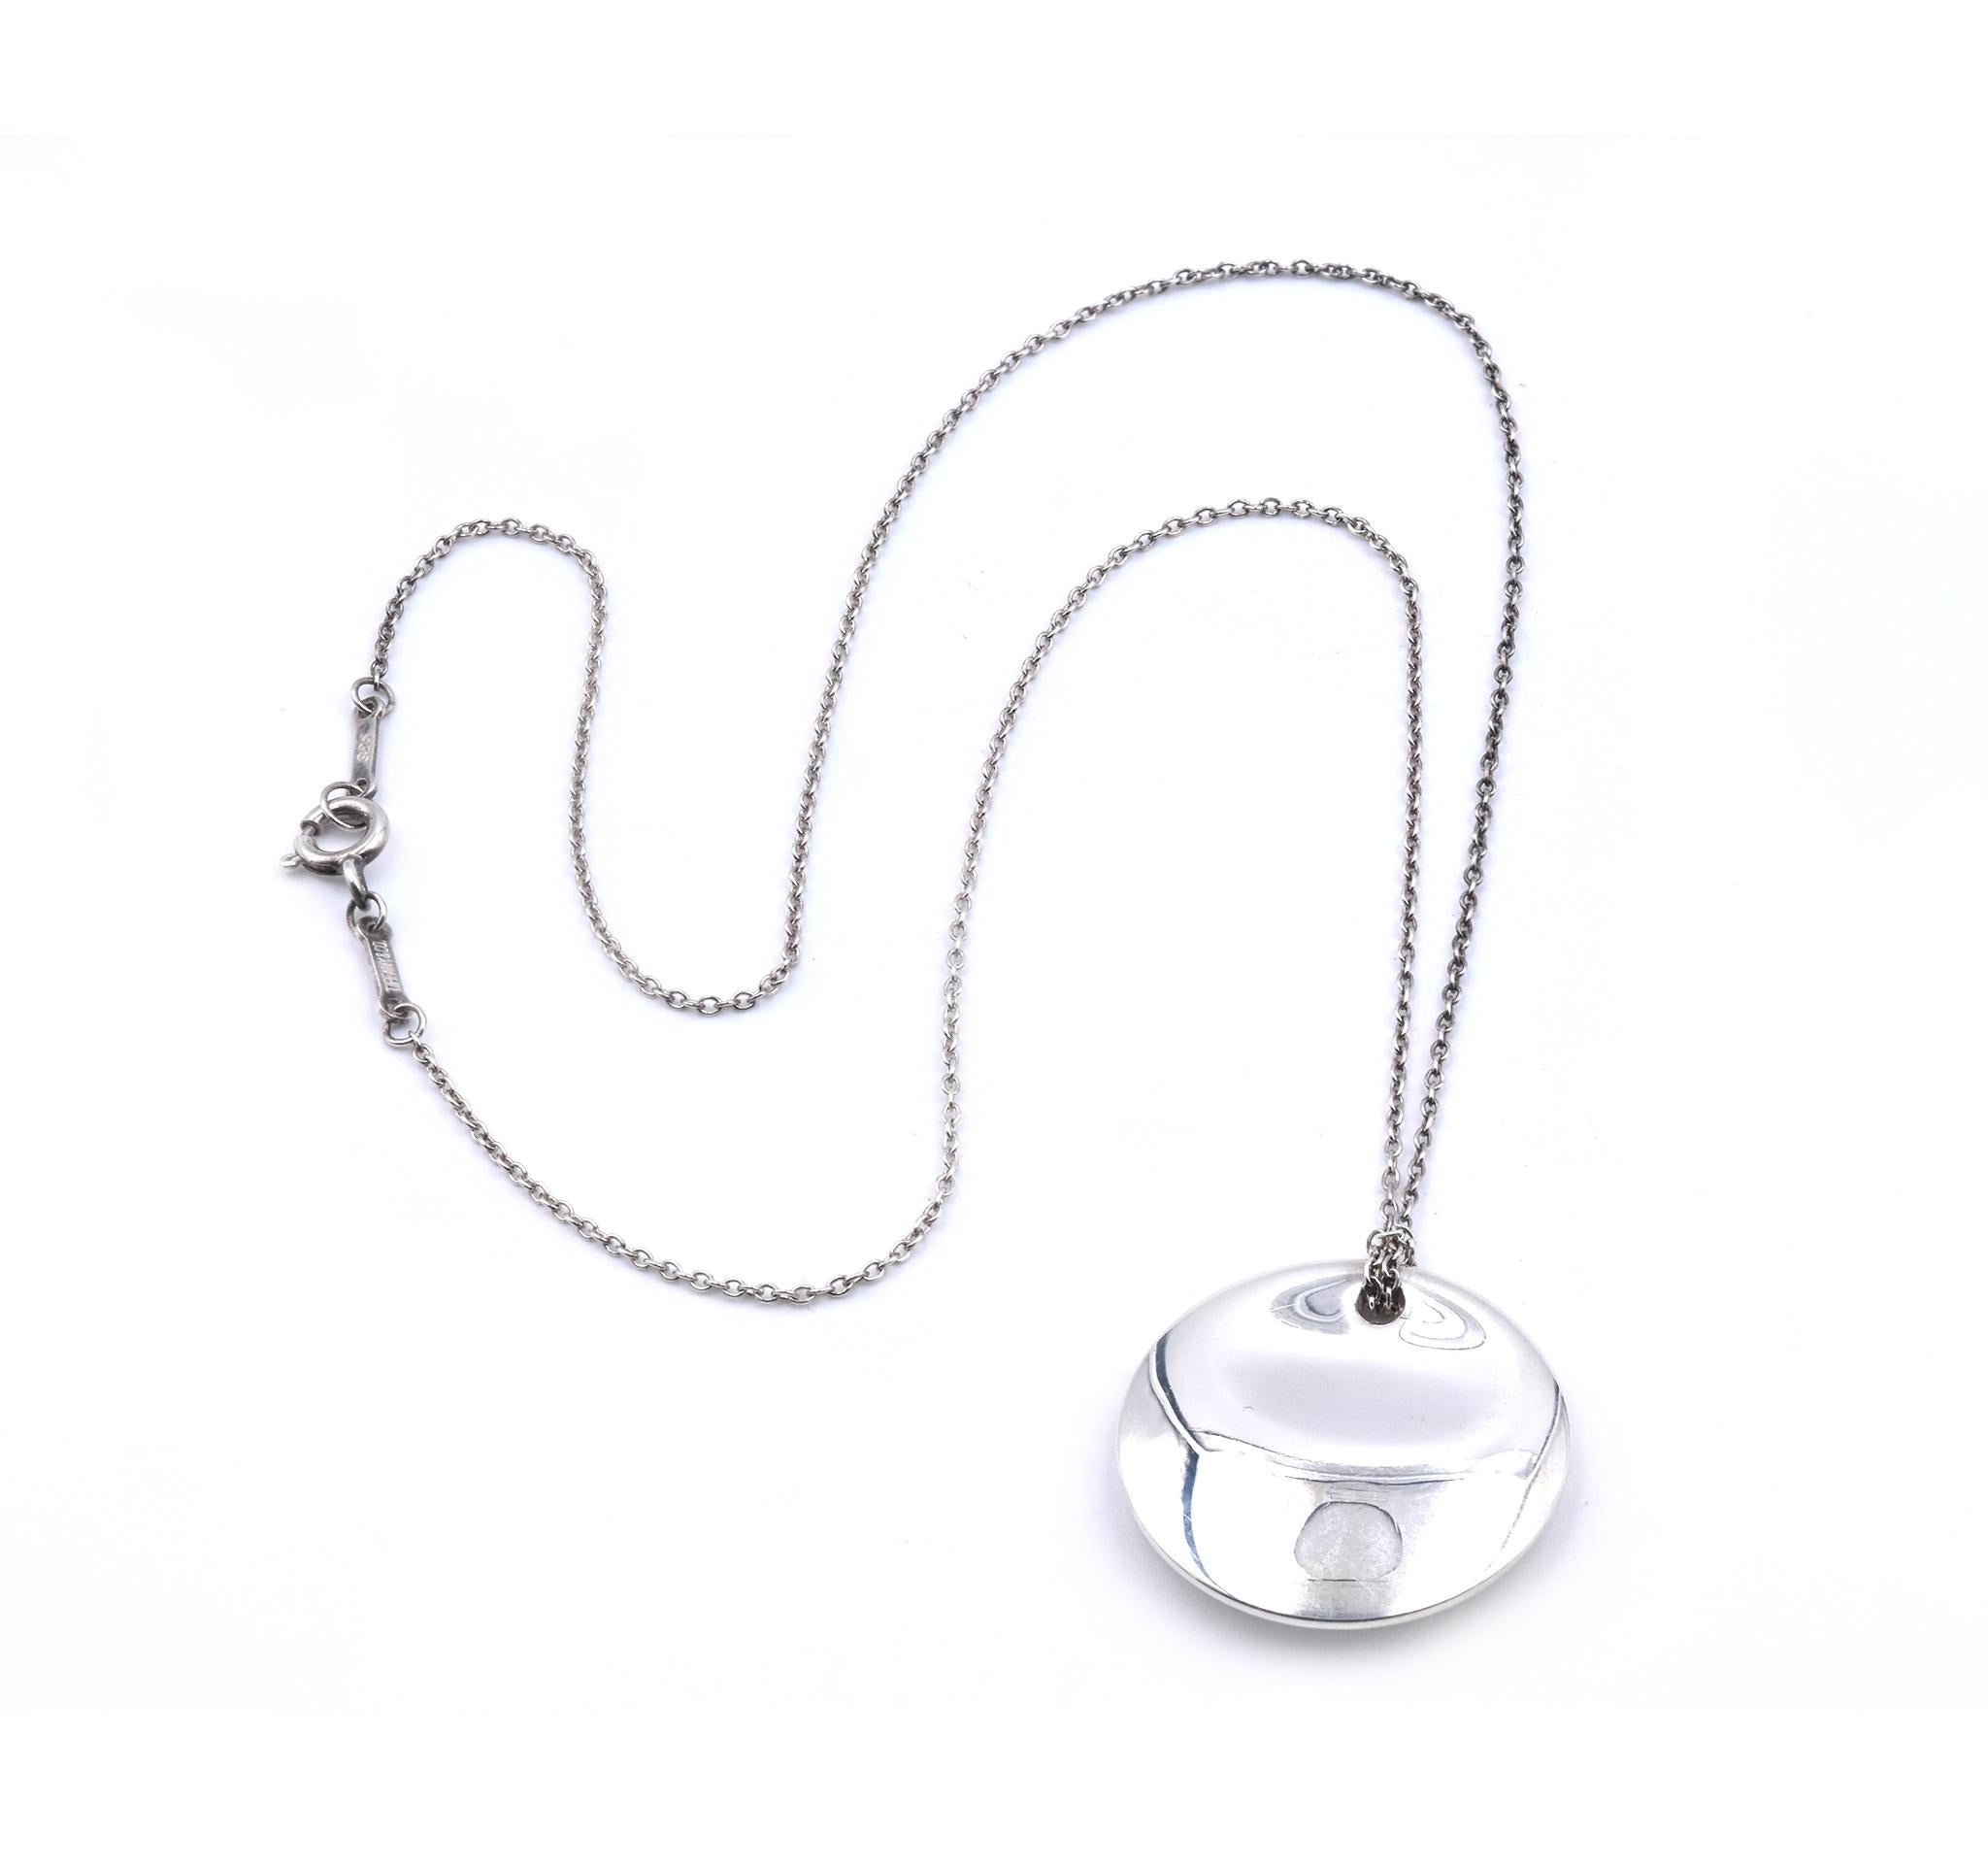 Designer: Tiffany & Co. / Elsa Peretti
Material: sterling silver 
Length: 16-inches in length 
Weight: 12.06 grams